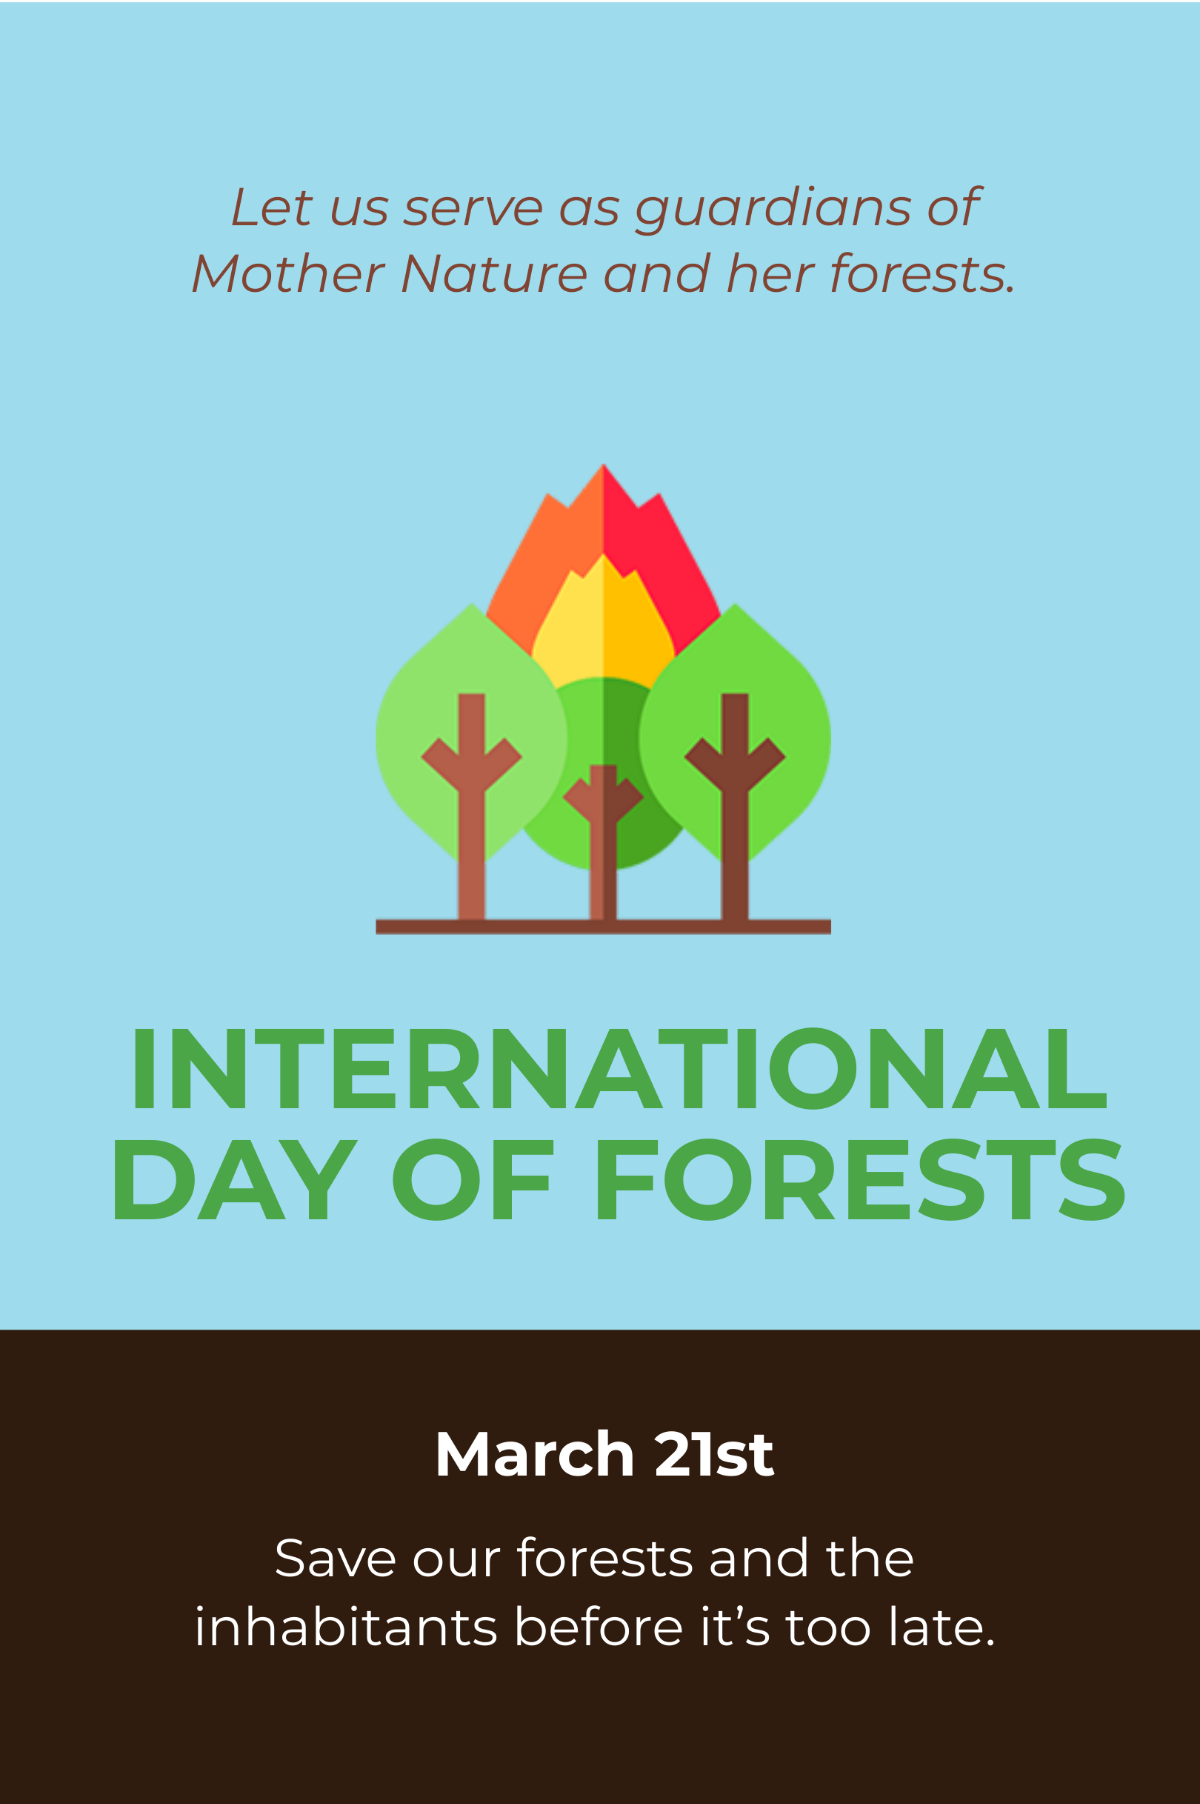 International Day For Forests Tumblr Post Template